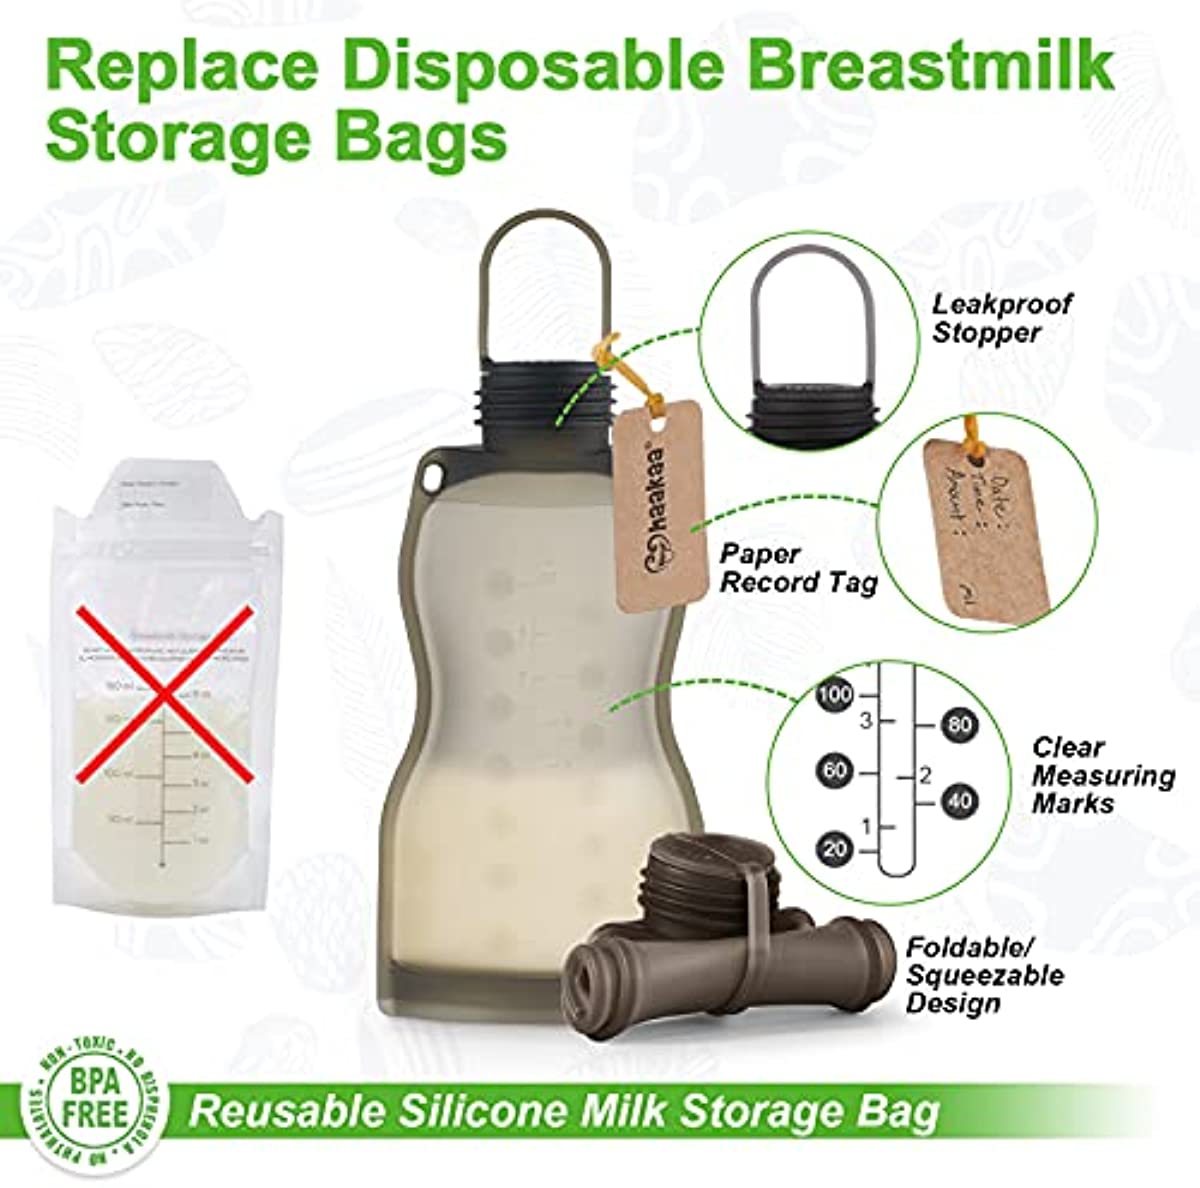 haakaa Silicone Manual Breast Pump 5.4 oz & Reusable Breastmilk Storage Bag 9oz Set - Milk Collector| Letdown Catcher| Leak Proof Storing Pouches| Breast Milk Saver for Breastfeeding Moms